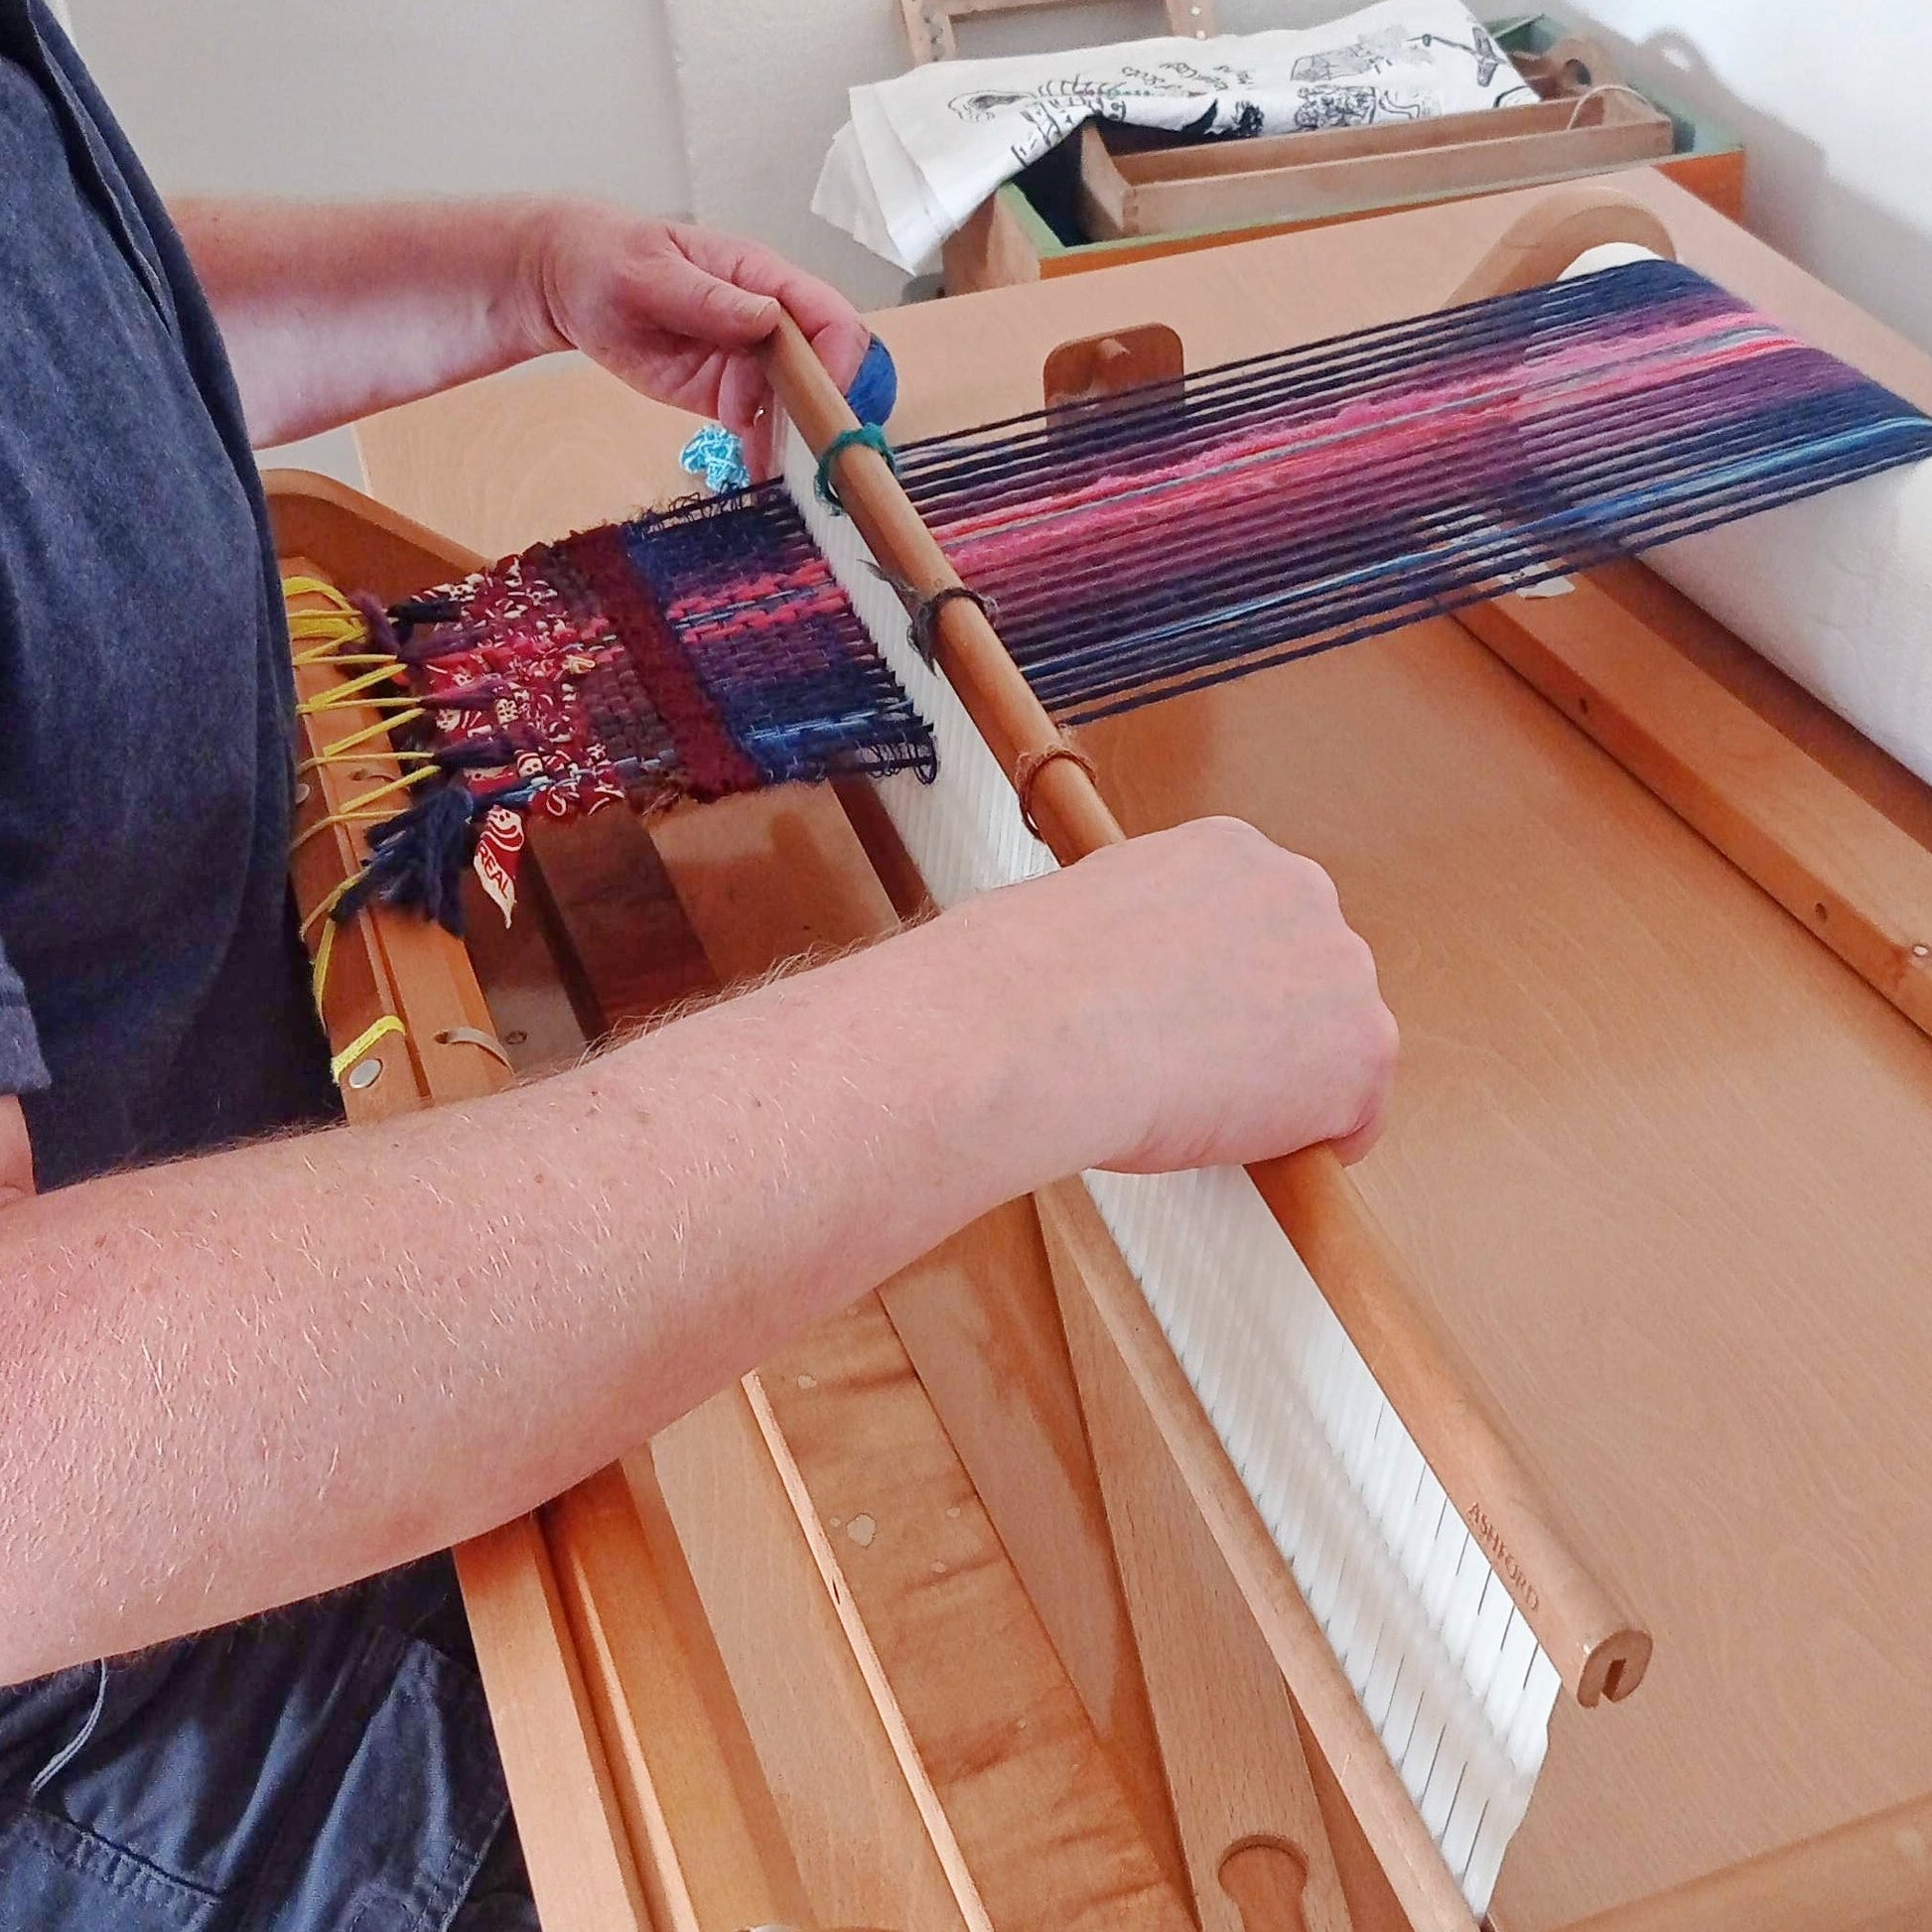 4-hour Textile Weaving Workshop with Rita in Lisbon, Portugal